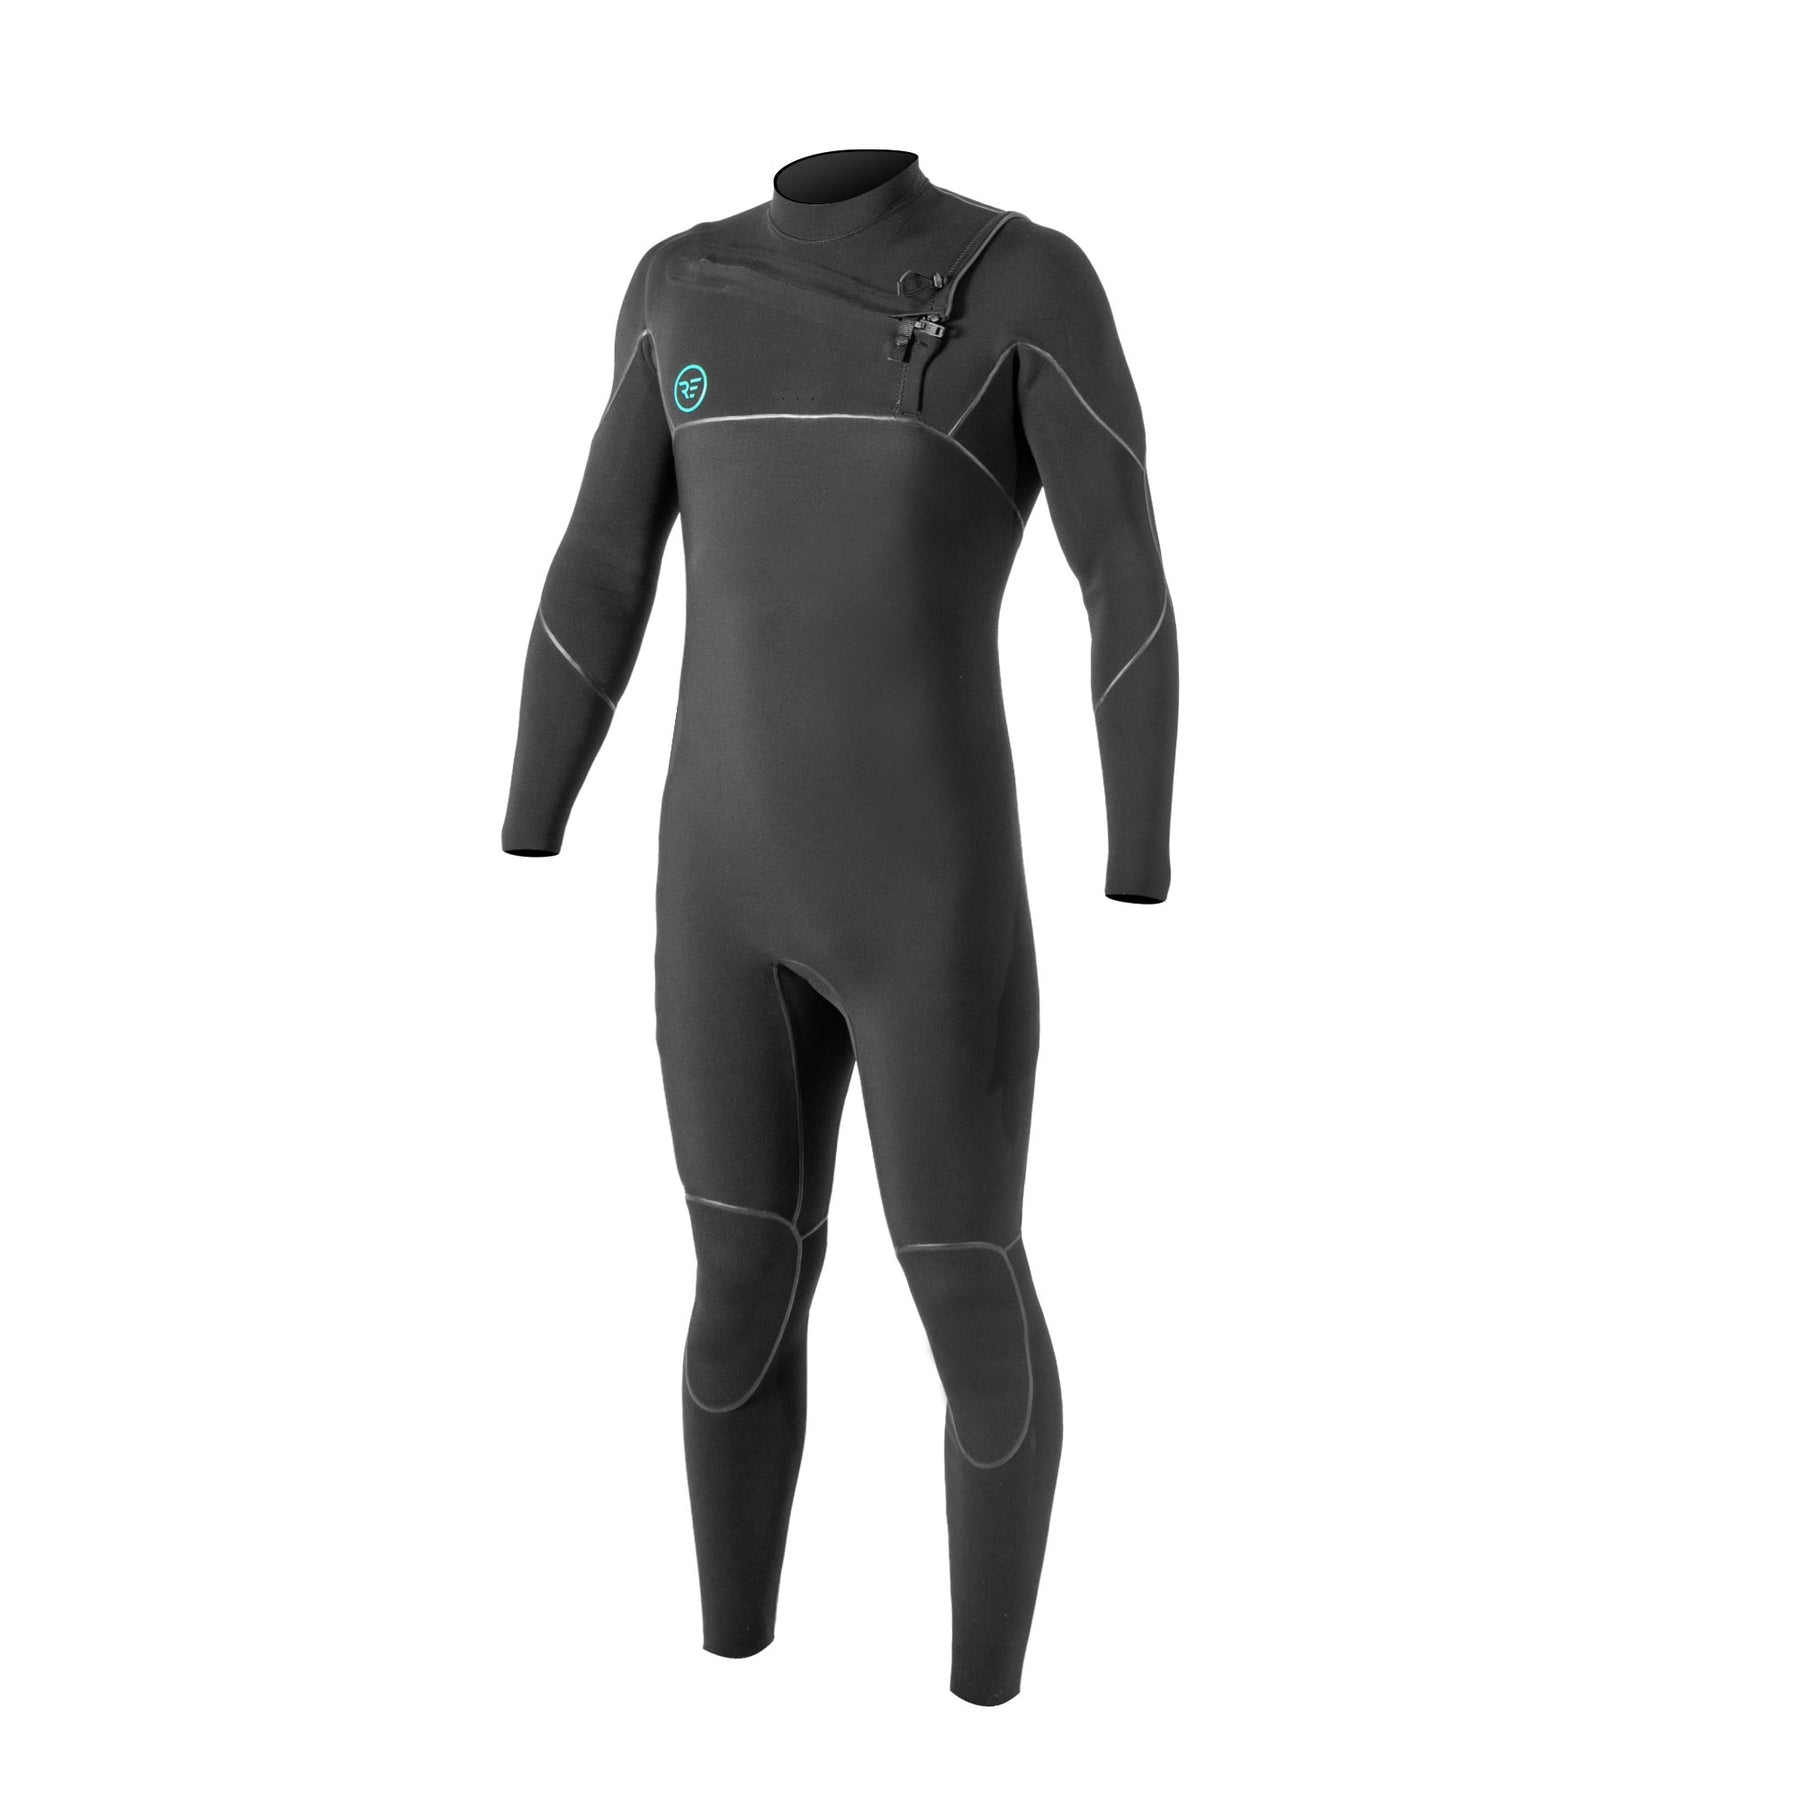 Ride Engine Apoc 5/4/3 FZ Wetsuit – The Foiling Collective